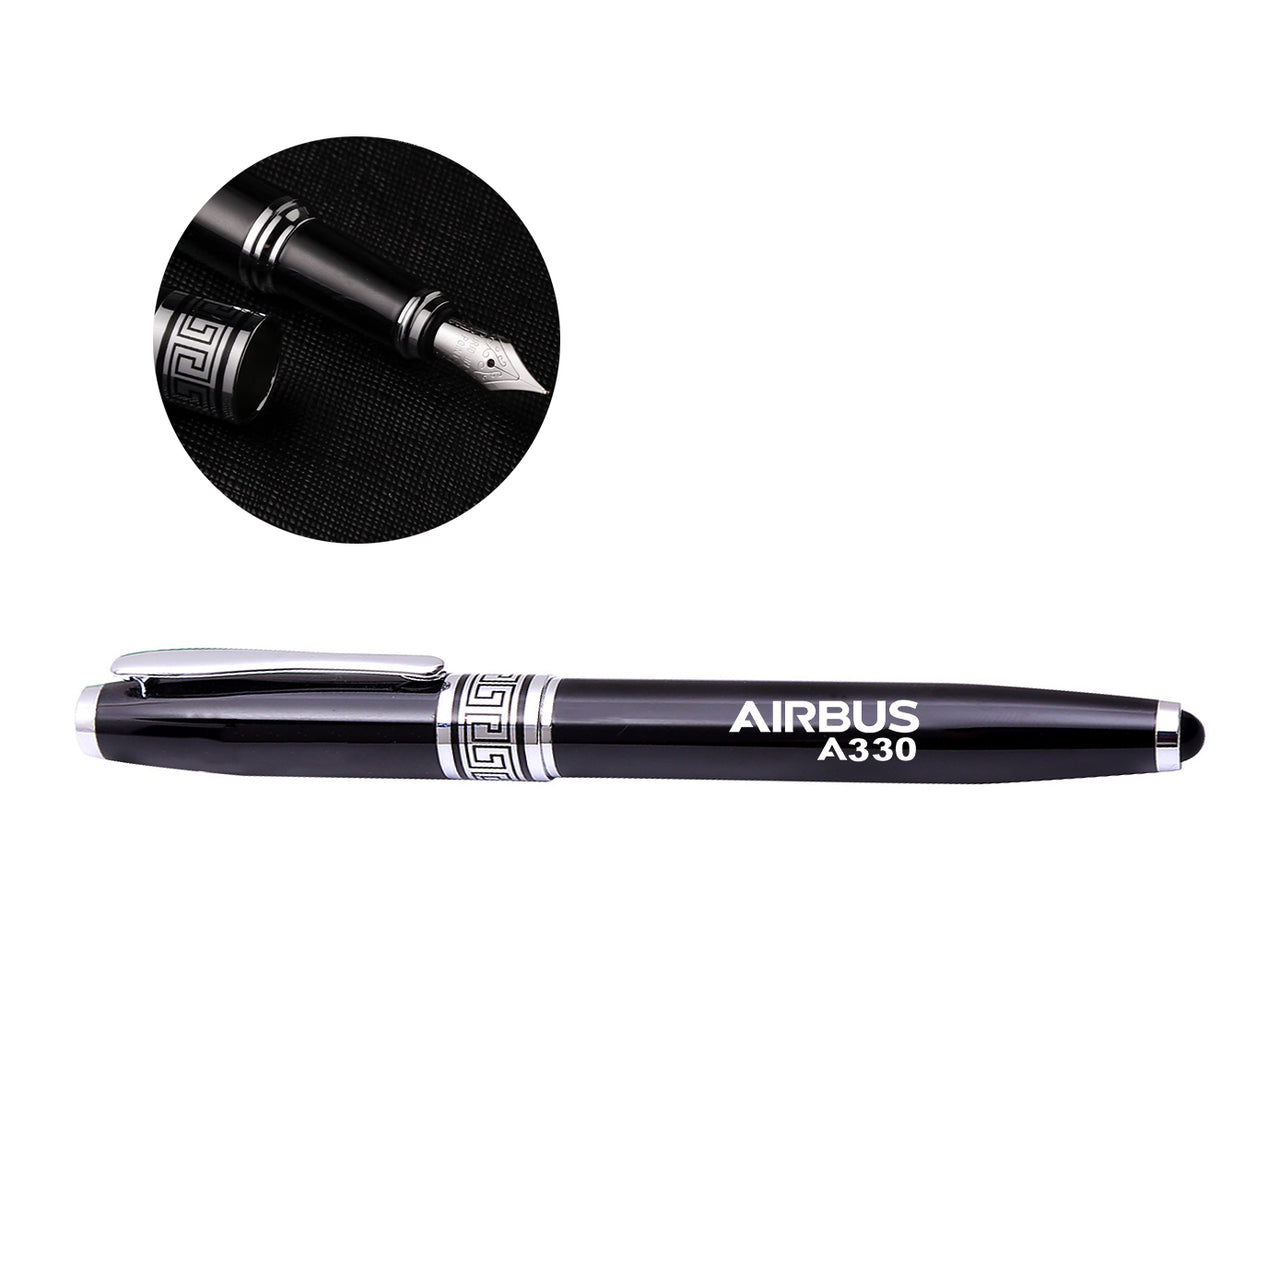 Airbus A330 & Text Designed Pens